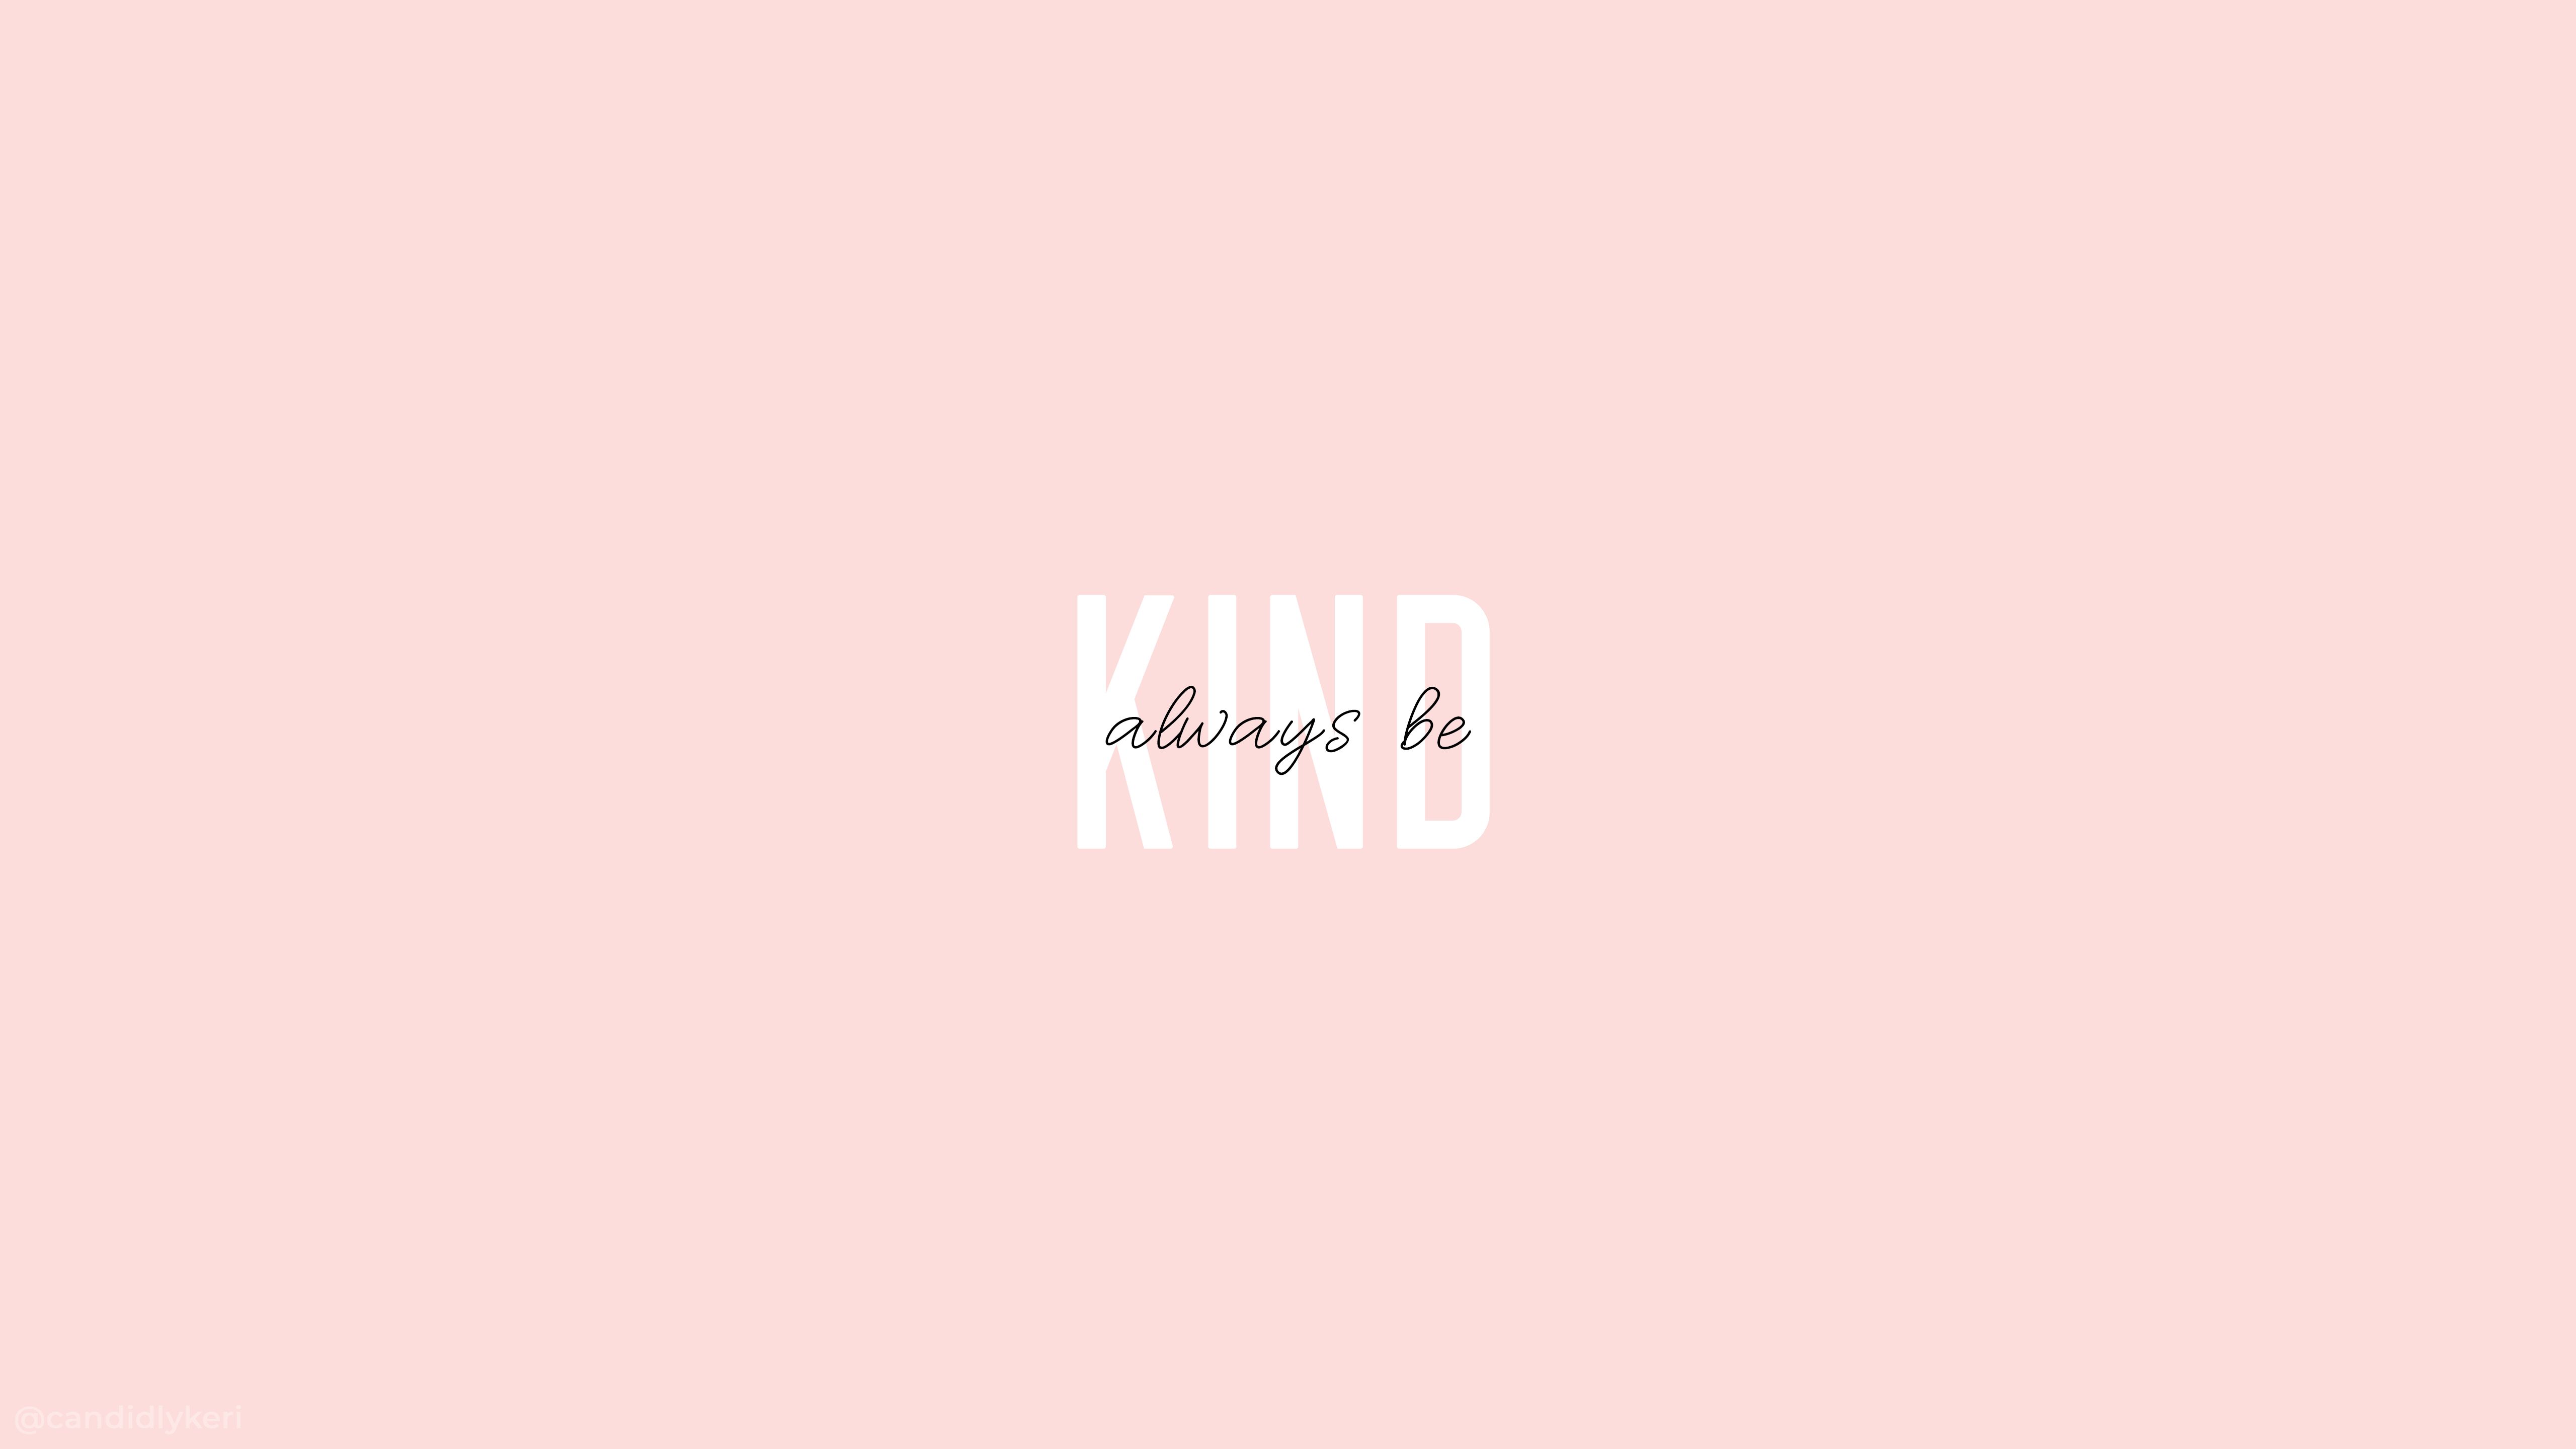 Always be kind wallpaper for phone and desktop - free download! - Computer